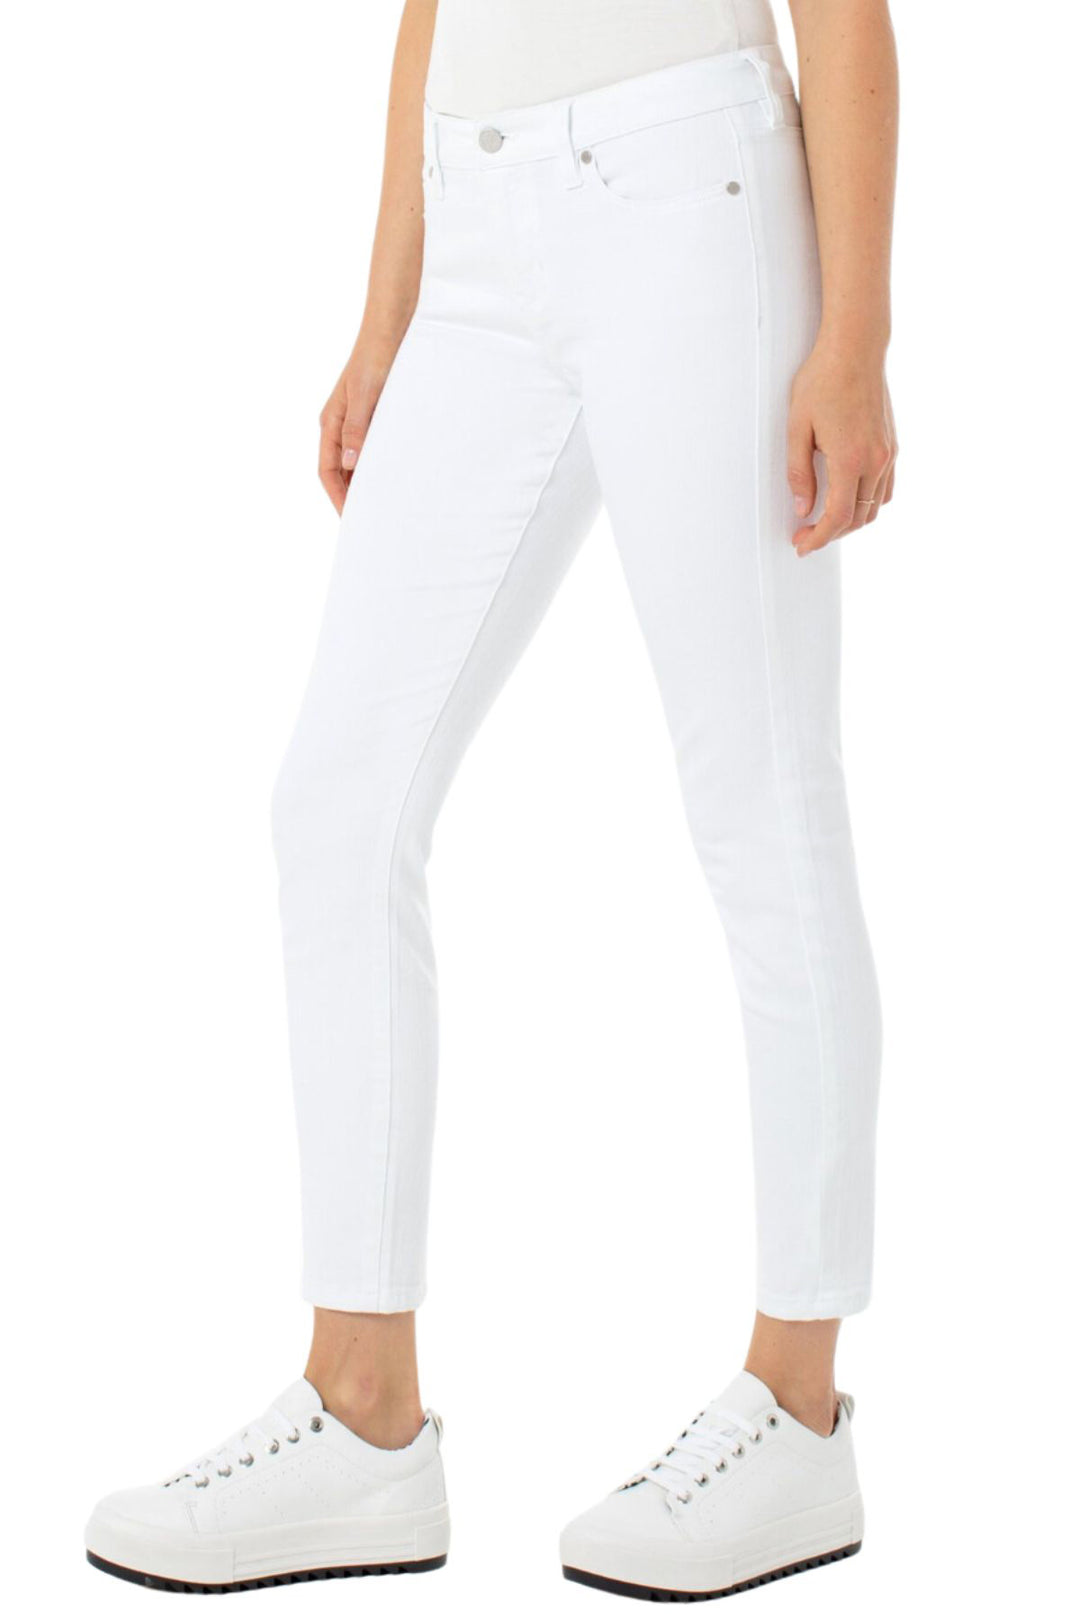 These gorgeous Abby Skinny Ankle Jeans by Liverpool Los Angeles  are a mid rise jean cropped at the ankle, providing you with comfort and support all day.  Brand : Liverpool Style Code : LM2005QY-W Fabric : 64% Cotton 26% Viscose 8% Polyester 2% Elastane Colour : Bright White Mid rise  Stretch denim 5 Pockets Zip fly & Button closure 